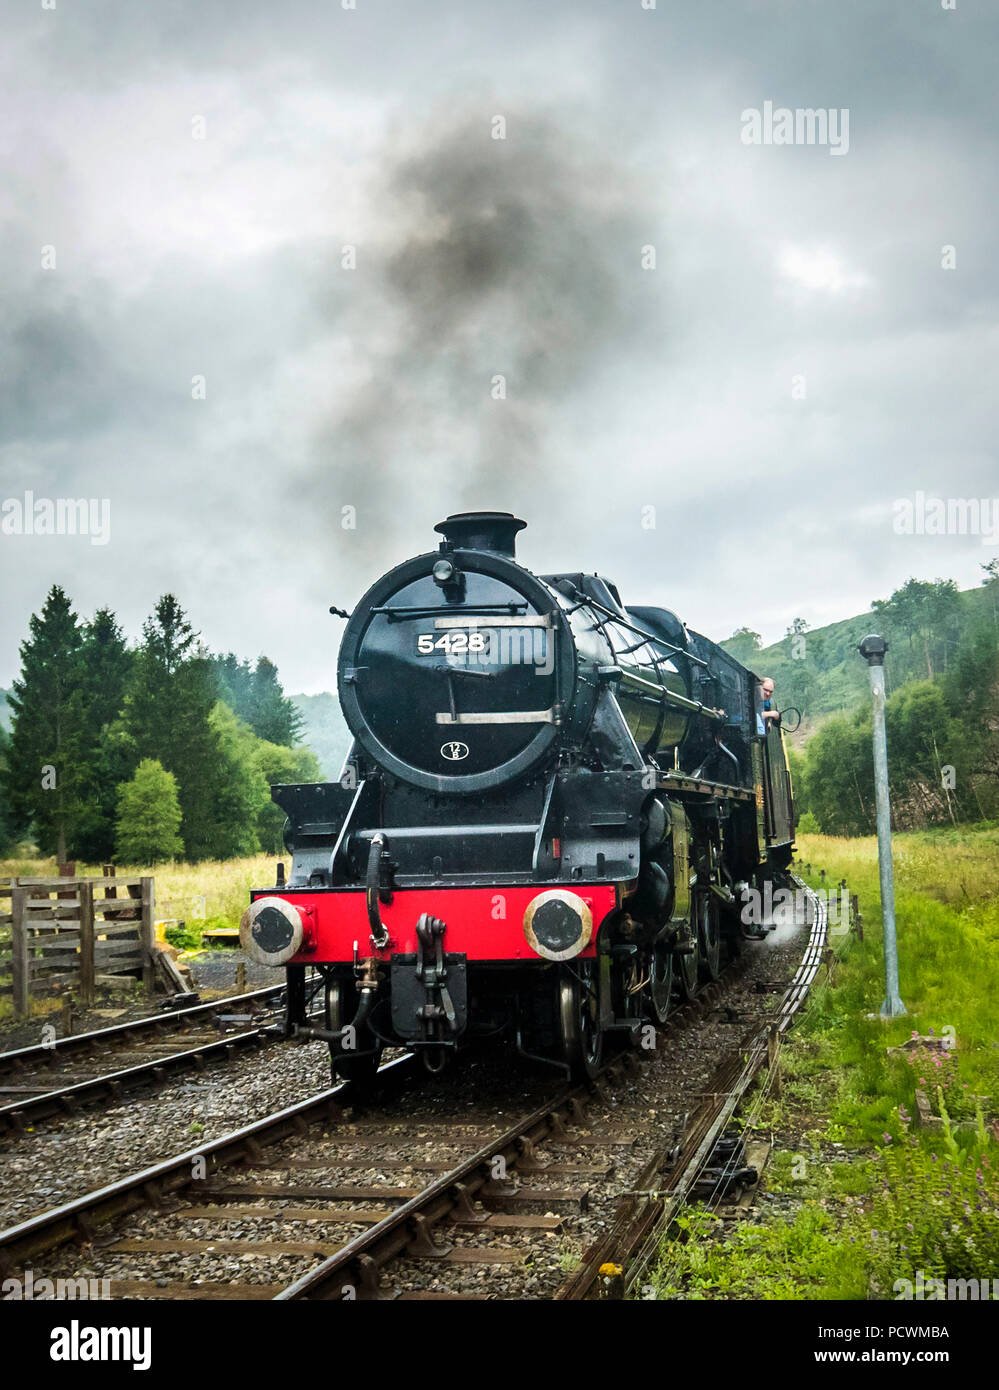 The 5428 LMS Black 5 locomotive on the North Yorkshire Moors railway as railway enthusiasts mark the 50th anniversary of the end of regular mainline steam services. Stock Photo